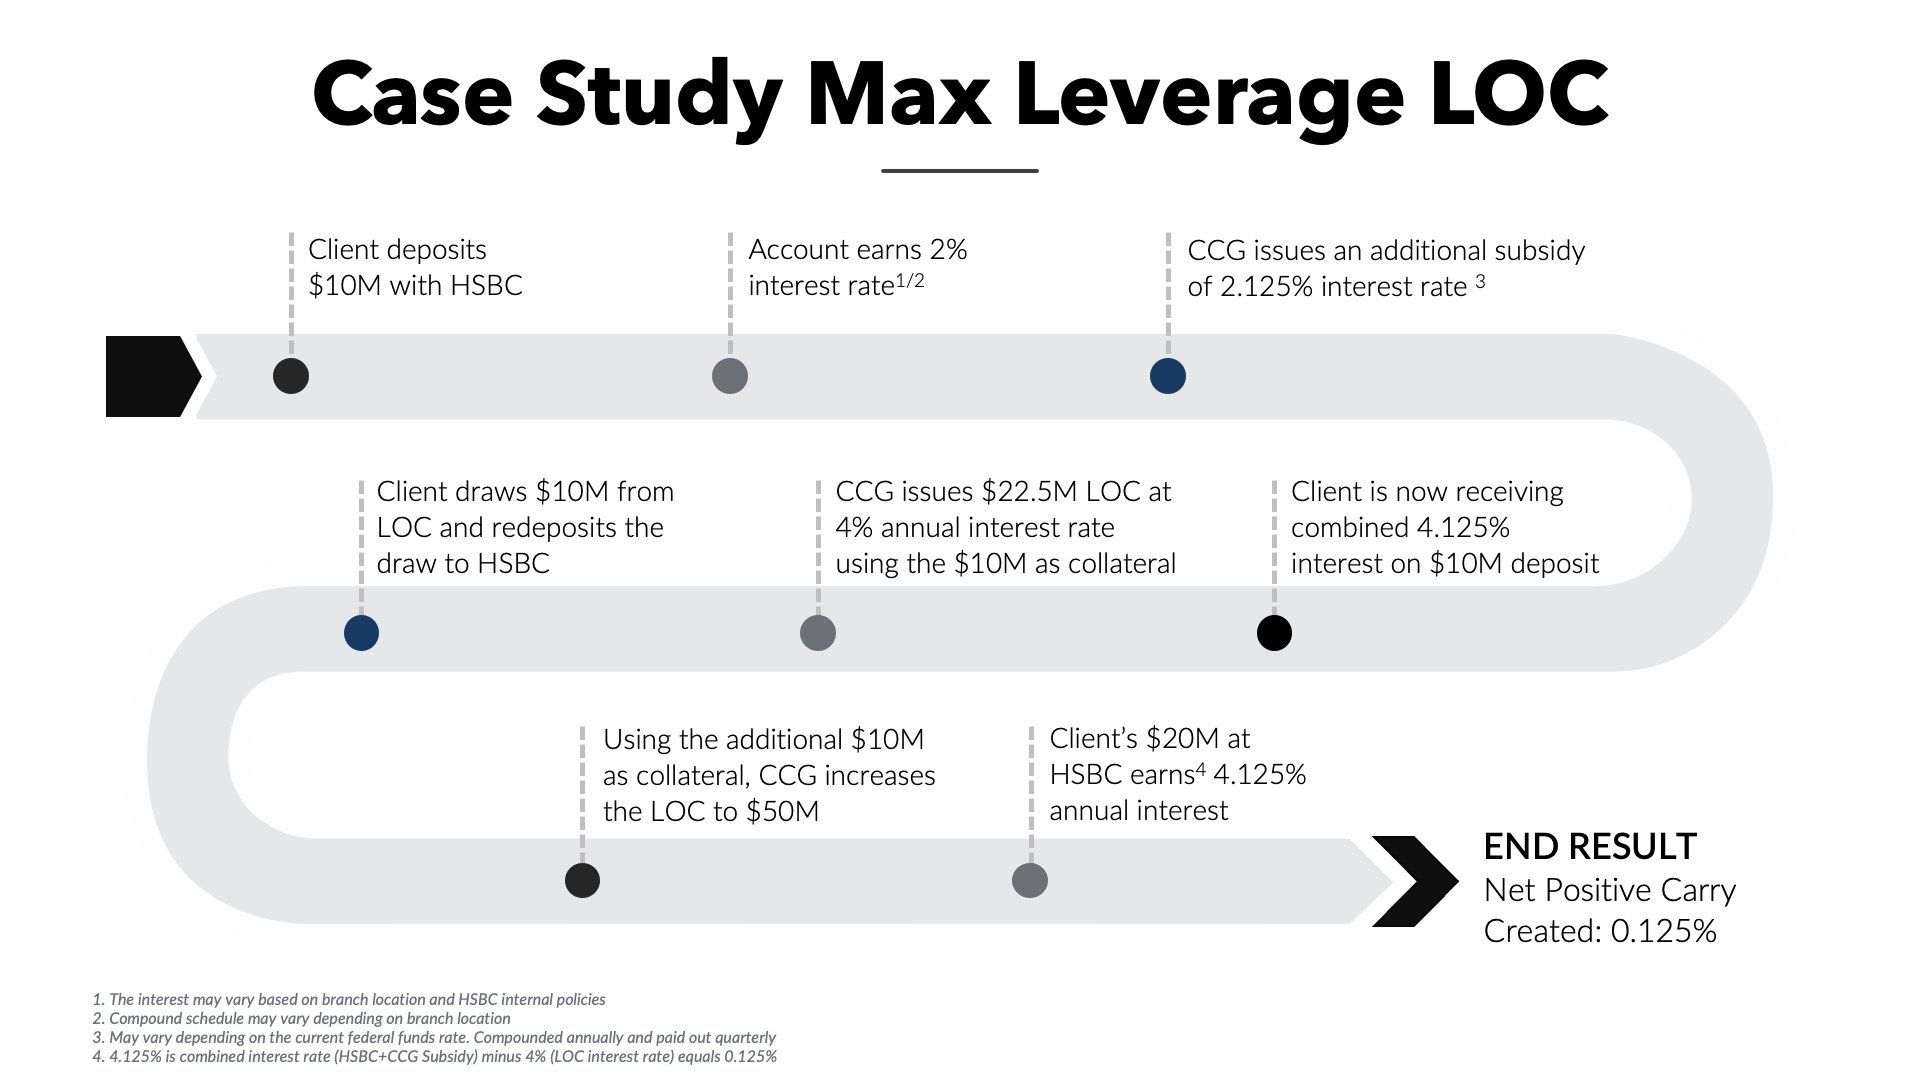 a timeline of a case study called case study max leverage loc .